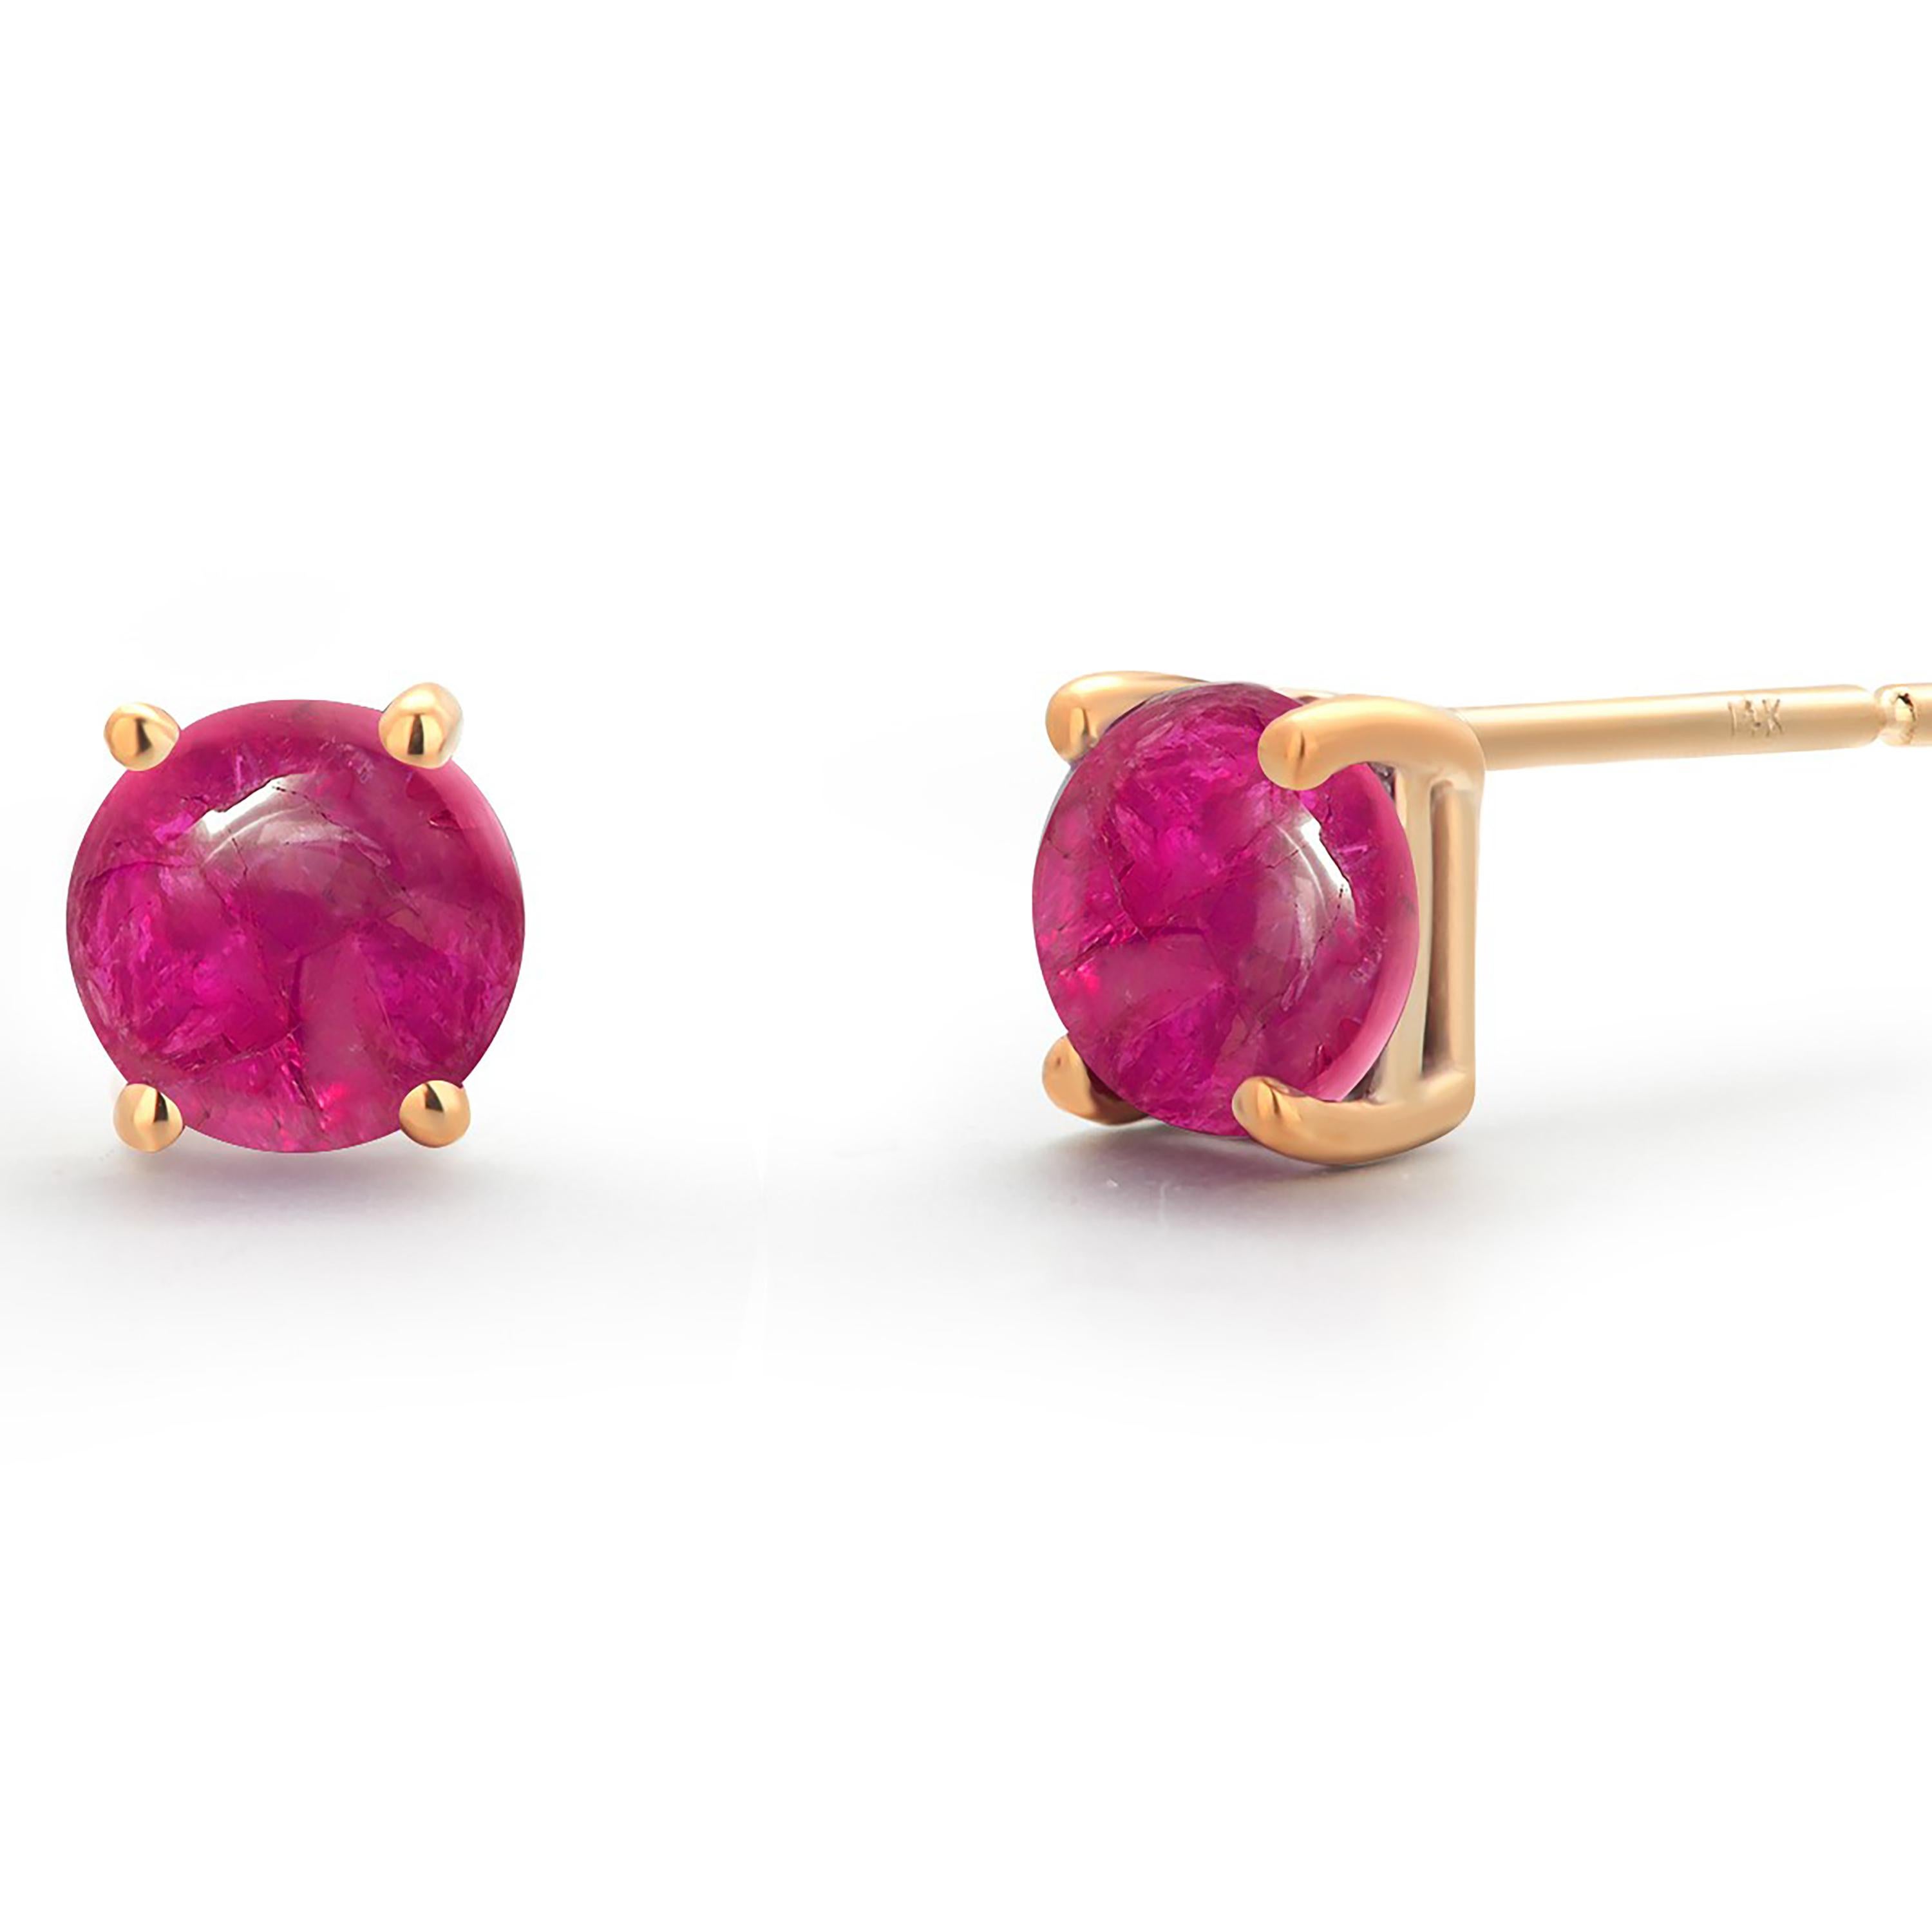 Round Cut Two Matched Cabochon Rubies Weighing 1.65 Carat 0.23 Inch Yellow Gold Earrings For Sale